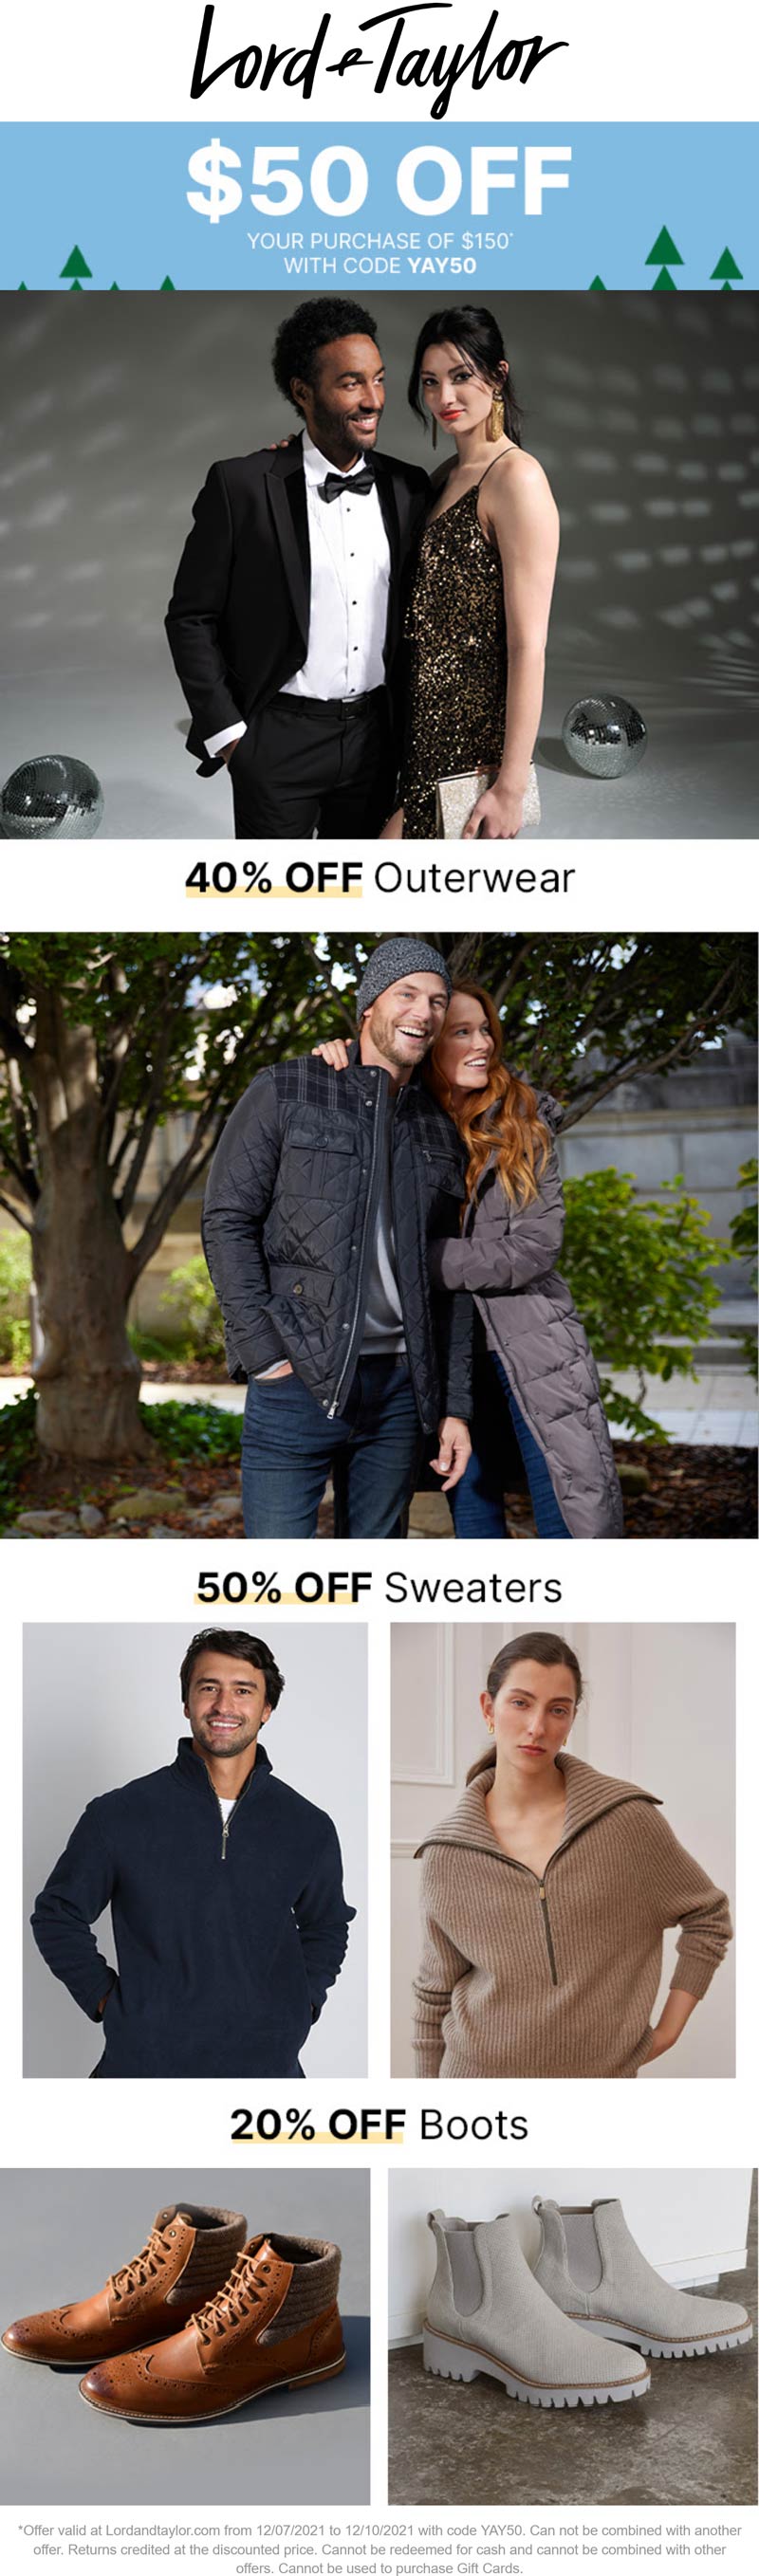 Lord & Taylor stores Coupon  $50 off $150 + 40-50% off outerwear at Lord & Taylor via promo code YAY50 #lordtaylor 